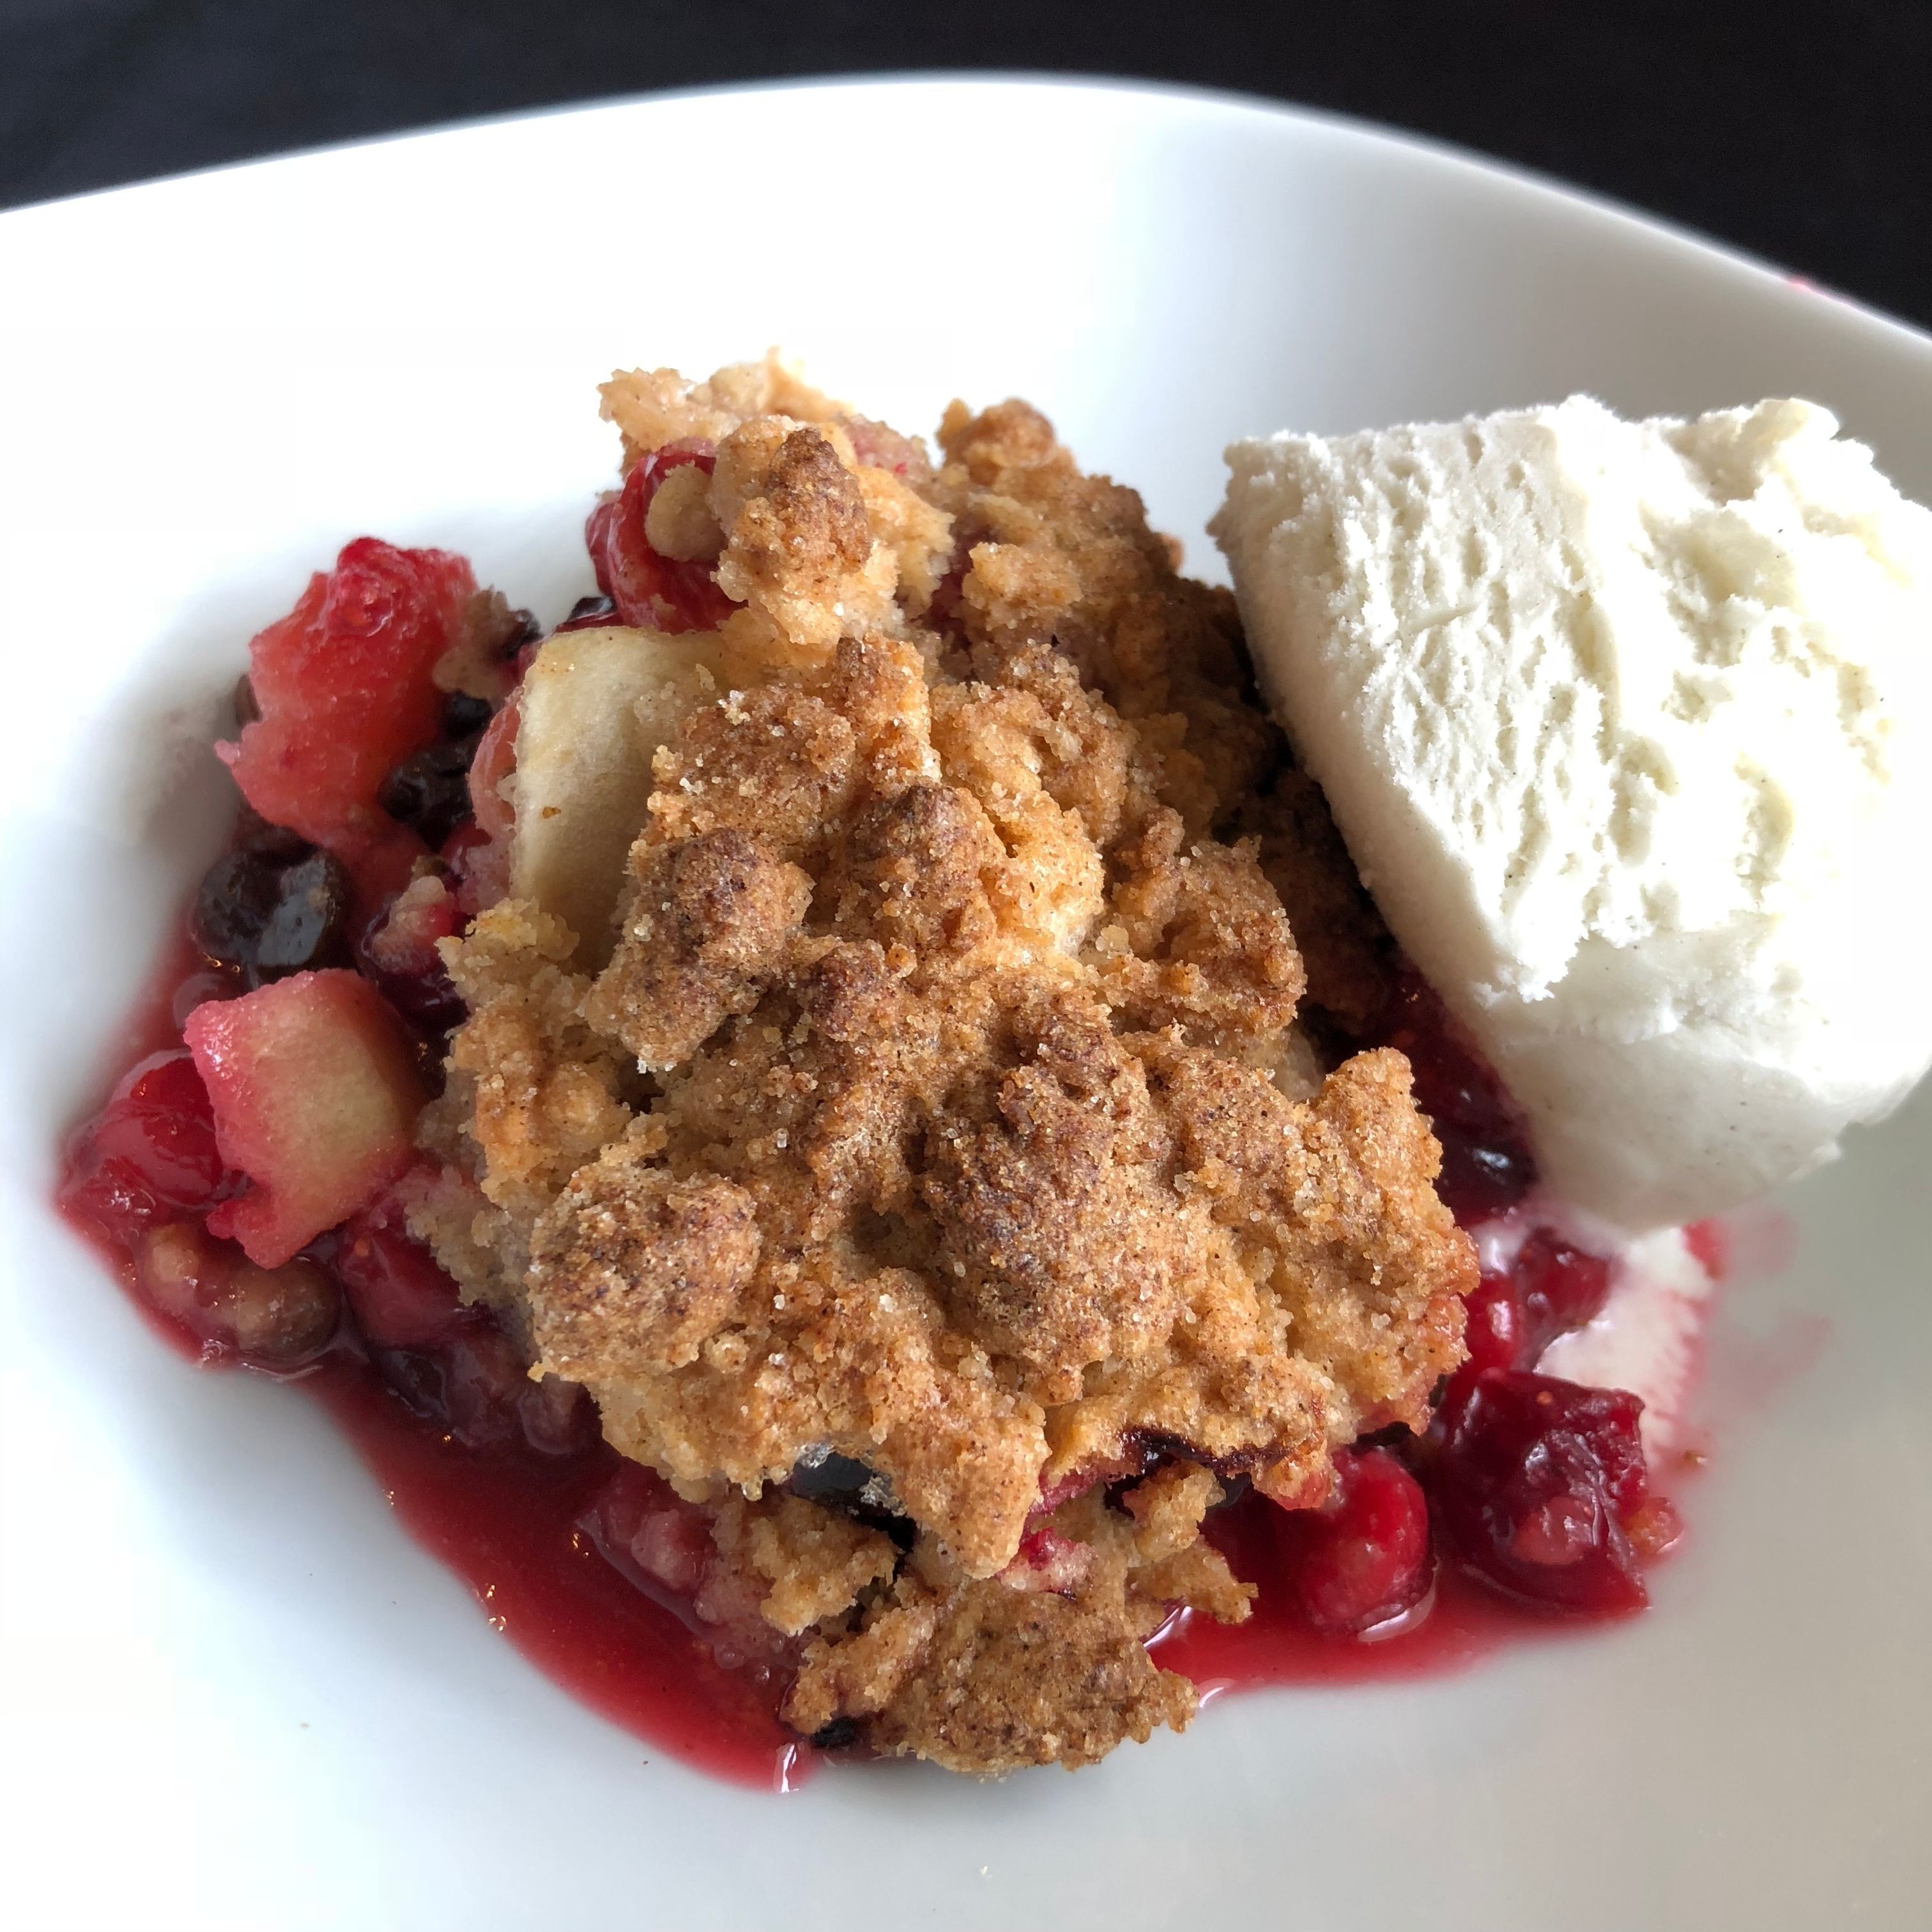 <p>Apples and cranberries come together to create a luscious crumble that is sure to produce a lot of "mms" at the Thanksgiving table. To really impress your guests, top this dish with heavy cream, whipped cream, or ice cream. </p>
                          